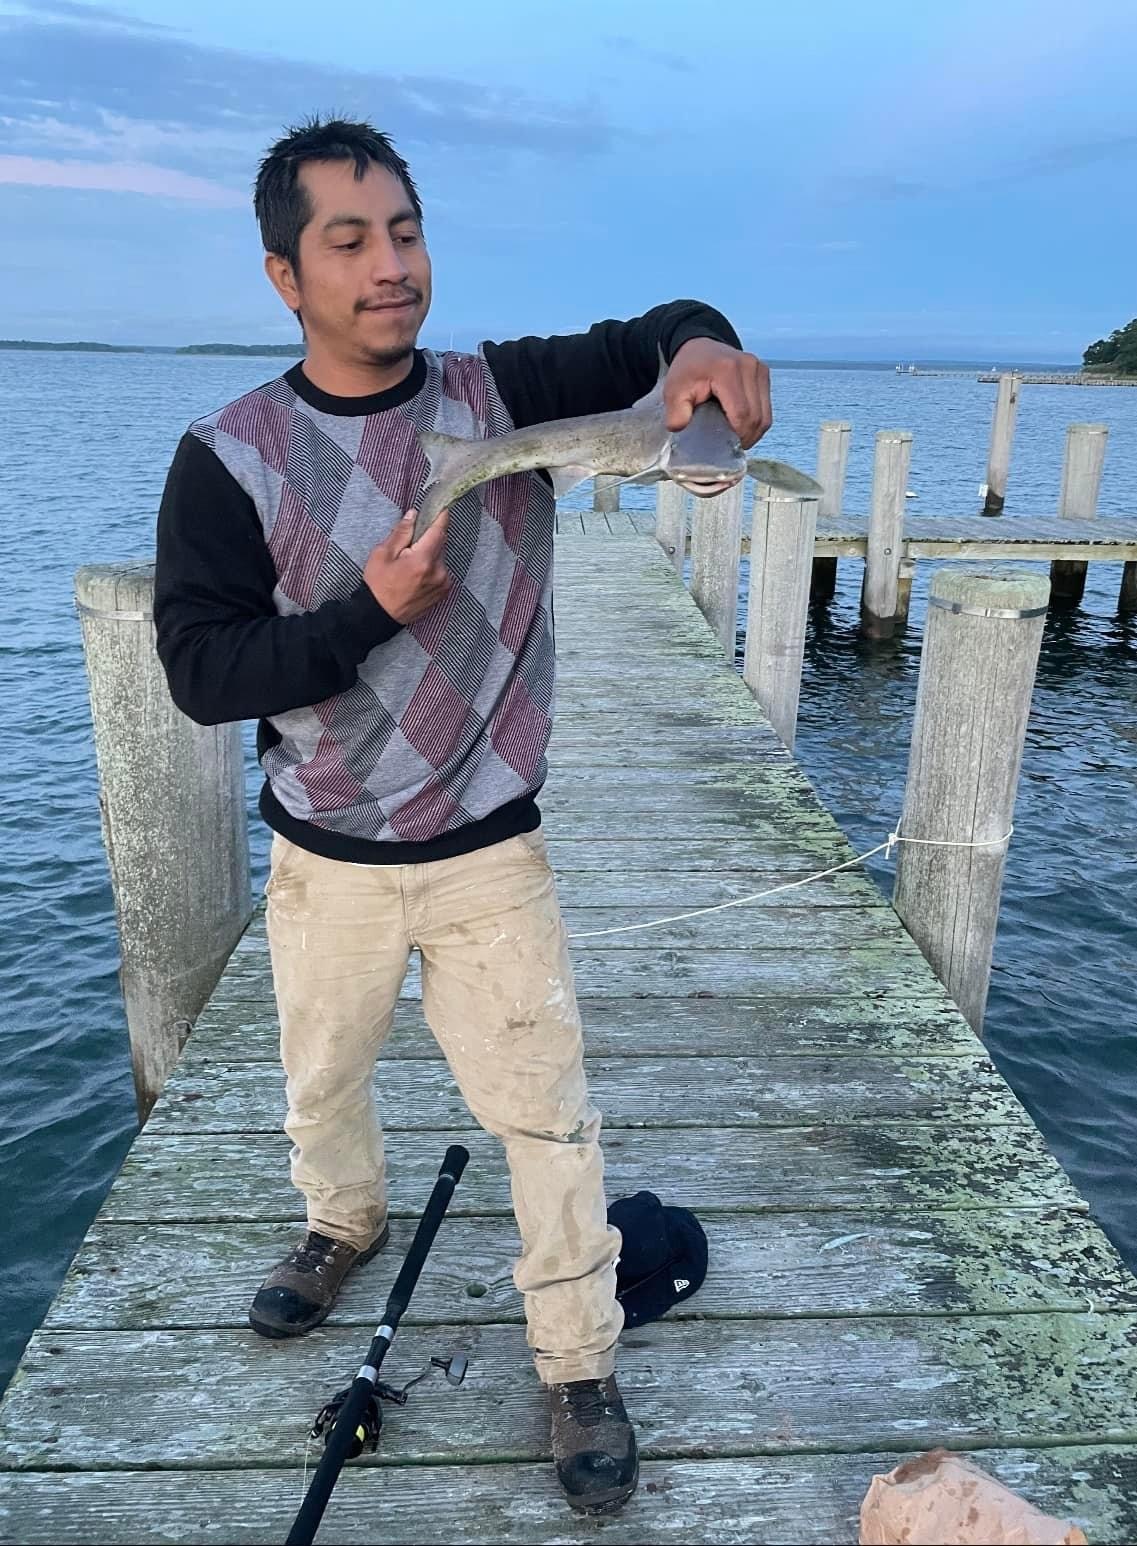 The family of Dario Cholula Rojas, who disappeared the night of October 19 when he went fishing in a kayak off Tyndal Point in North Haven, have offered a $2,000 reward to the person who recovers his body.